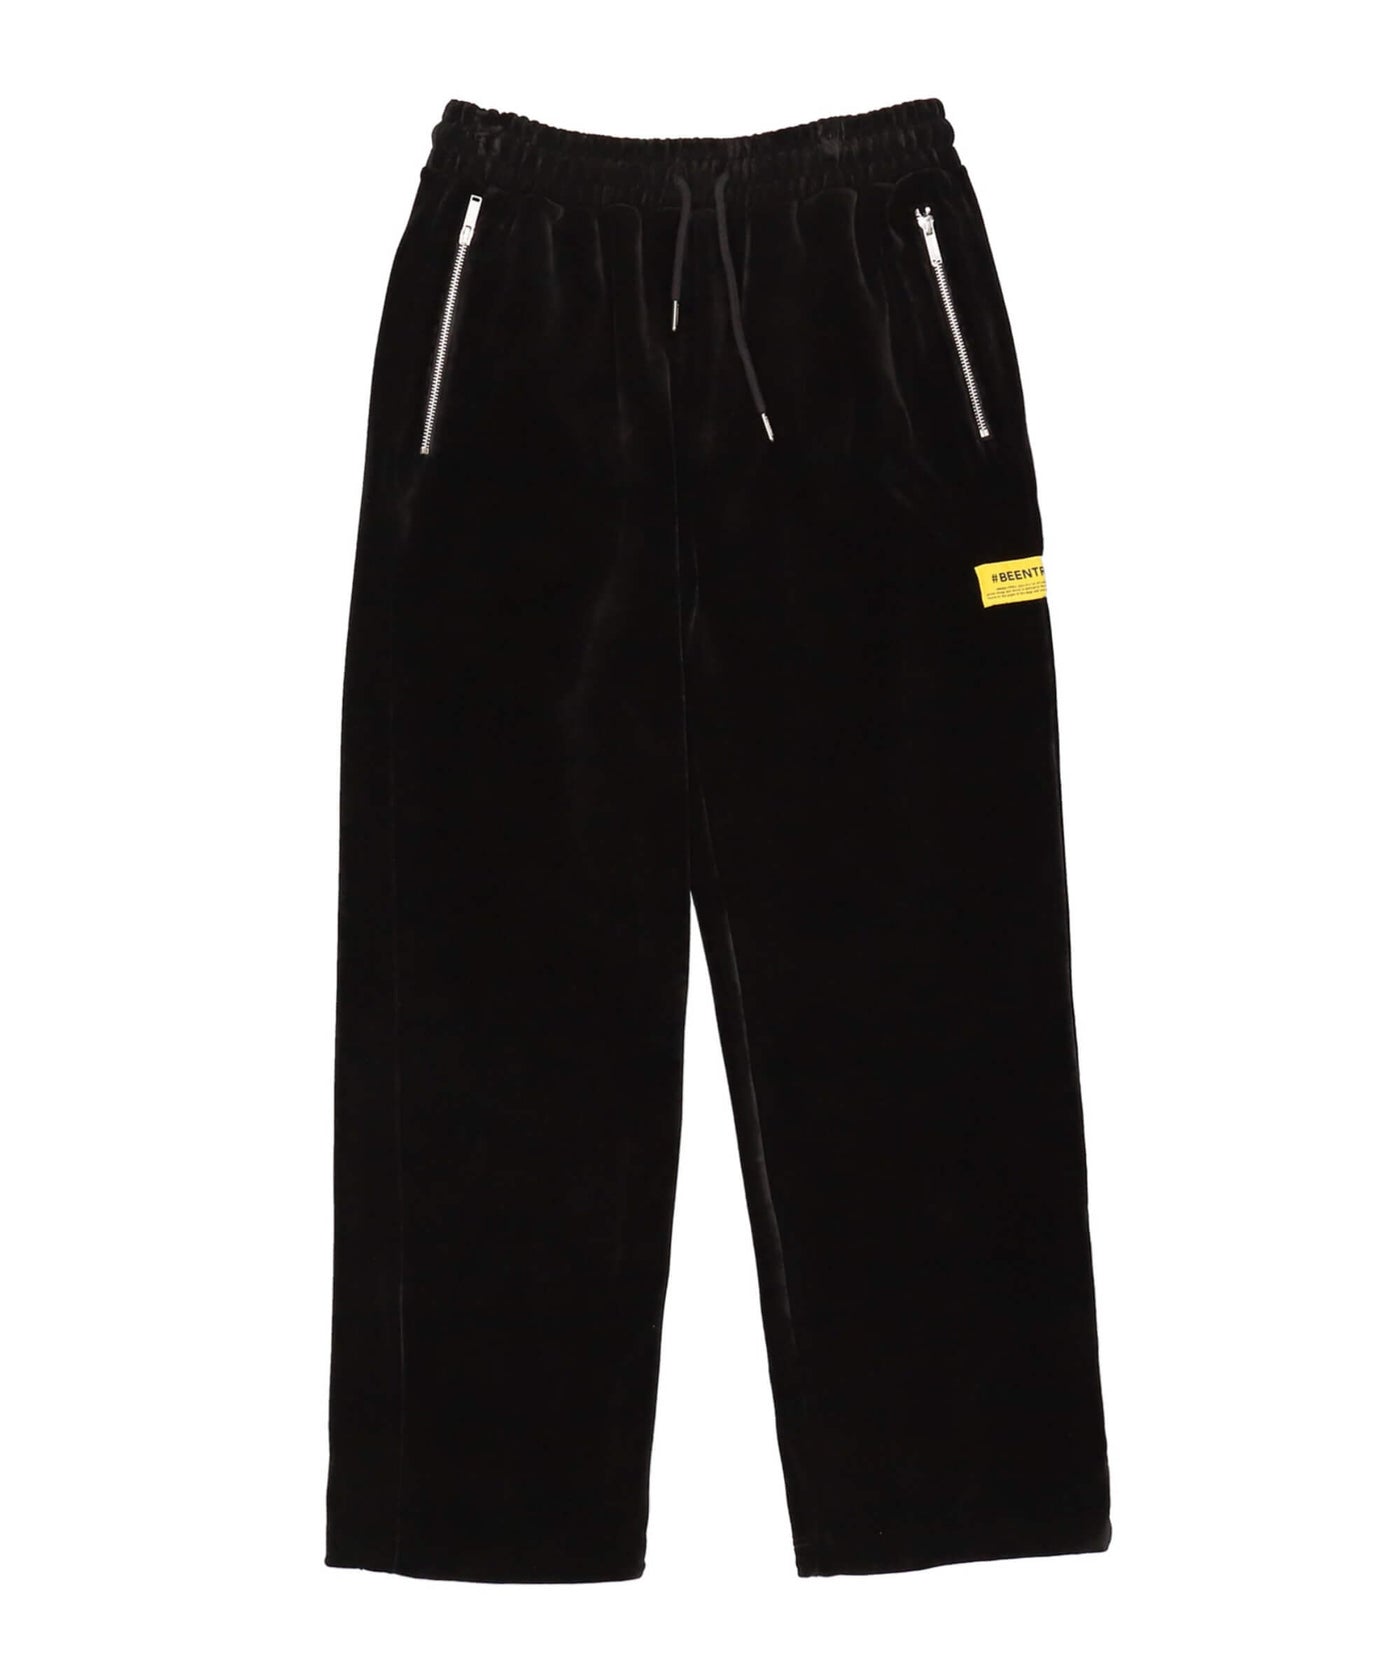 men-women-essential-comfortable-wide-loose-fit-track-chino-cargo-straight-velour-pants-black